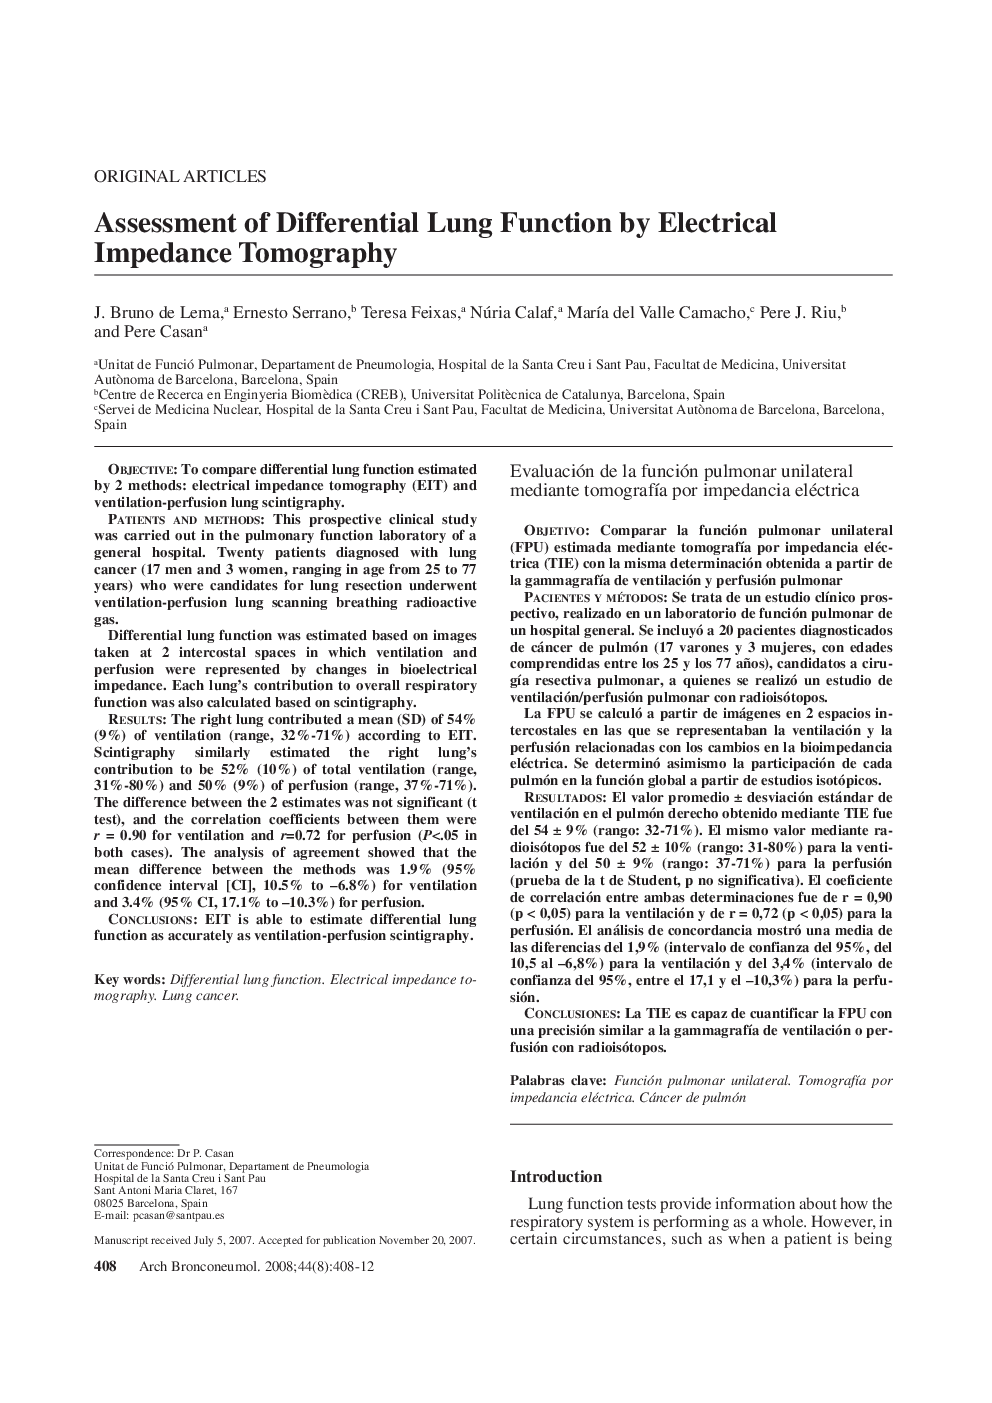 Assessment of Differential Lung Function by Electrical Impedance Tomography